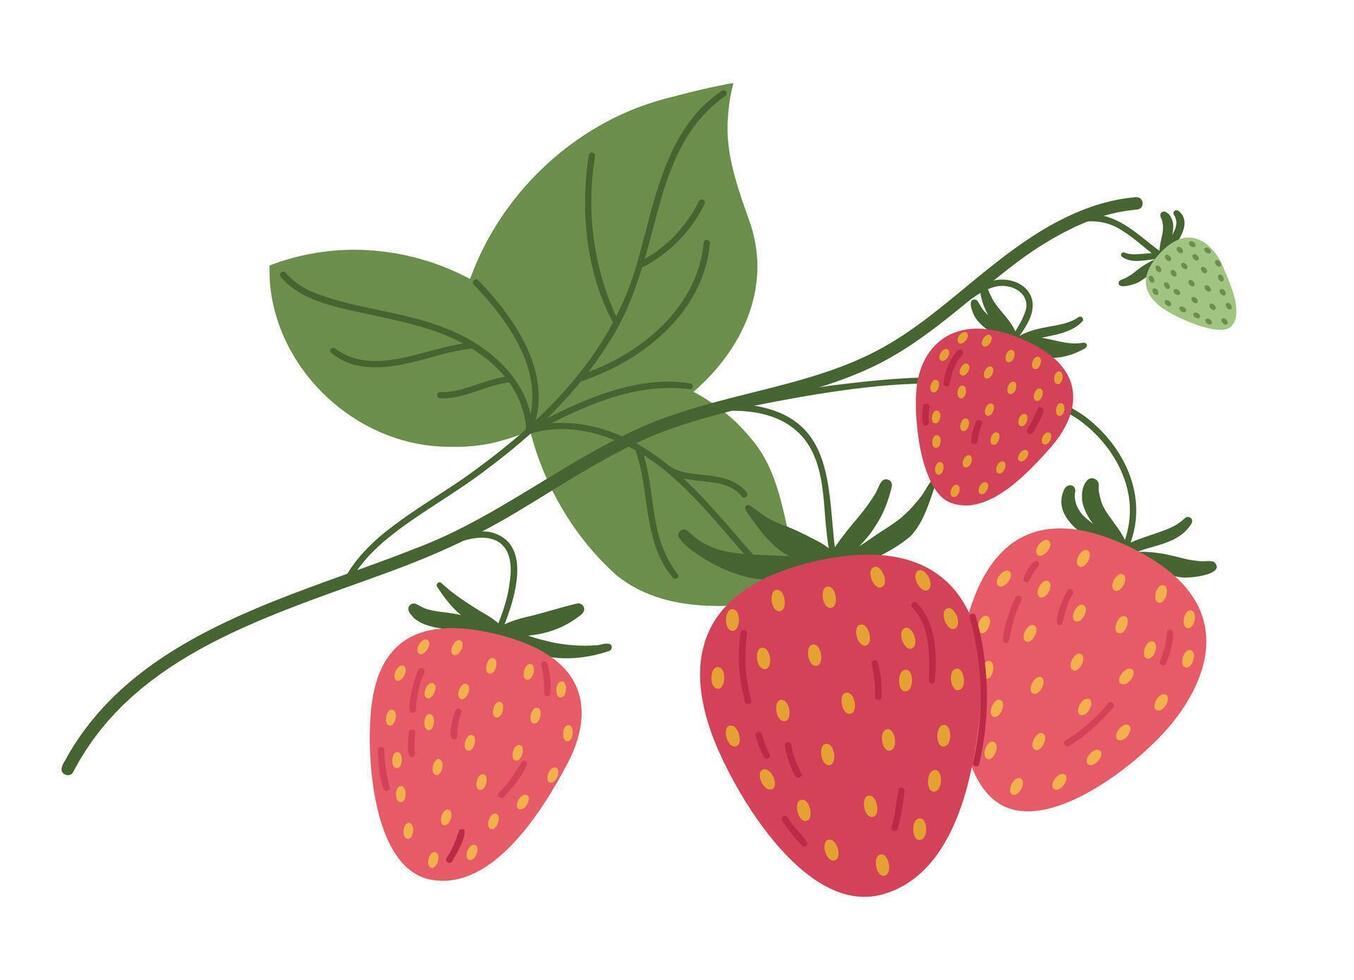 Hand drawn strawberries. Edible red berries for healthy nutrition, delicious forest strawberry branch flat vector illustration. Juicy strawberries